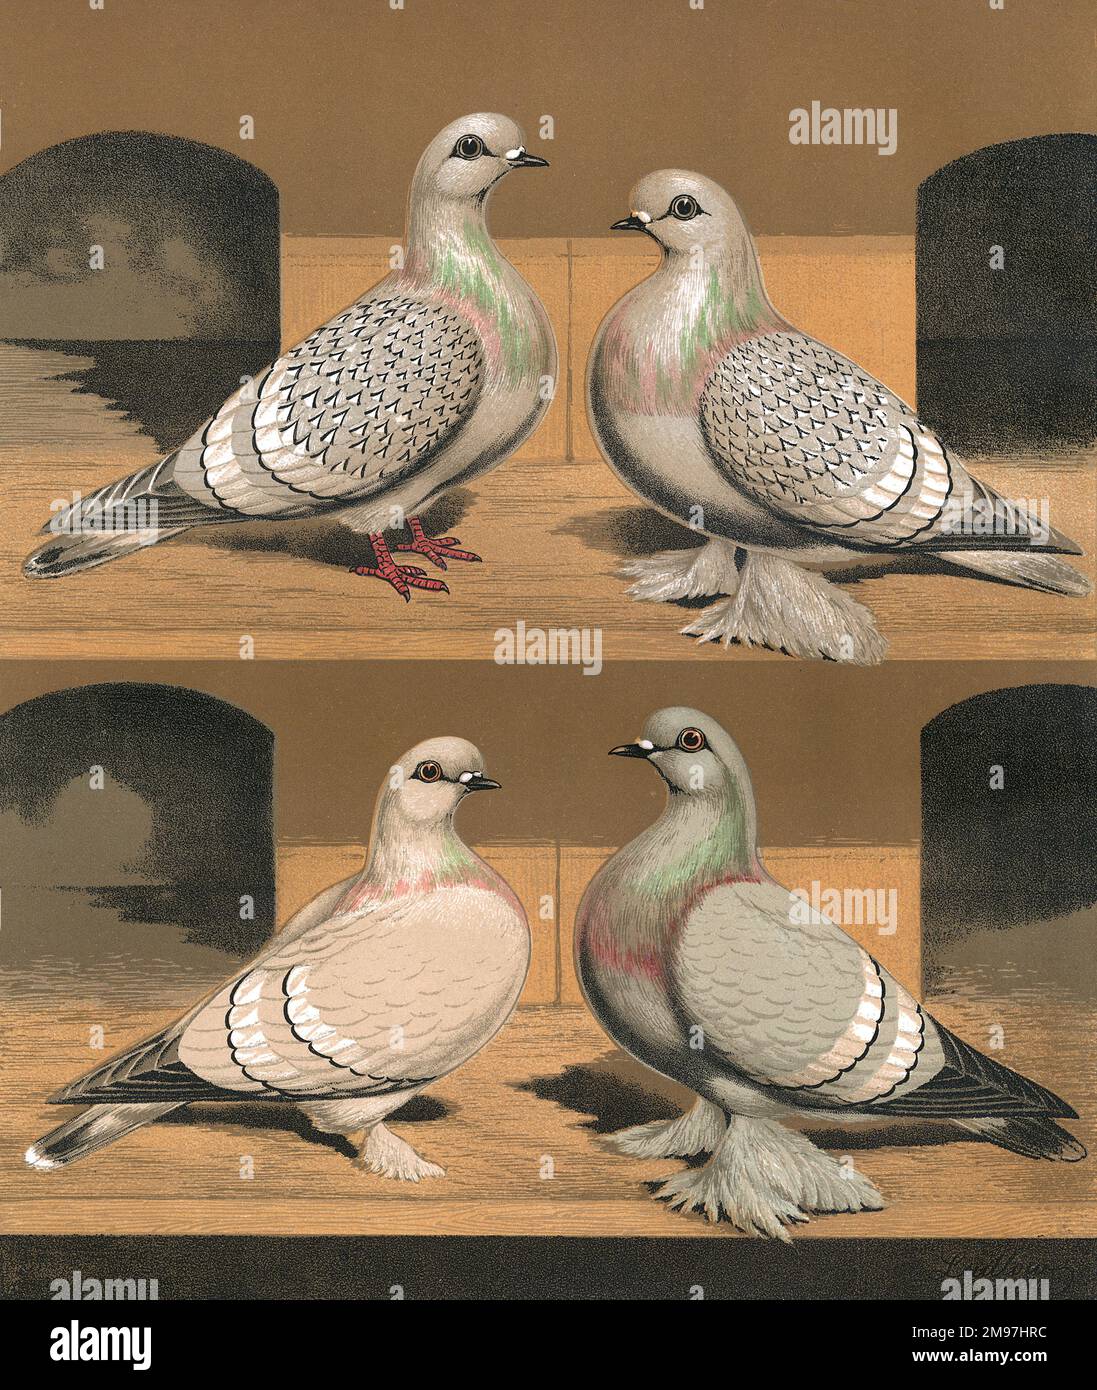 An Ural, Silver, Siberian and Blue Ice Pigeons are seen here illustrated inside a pigeon coop, as known as a 'loft'. The Ice Pigeon is a domesticated and fancy breed of pigeon. Each pigeon present their similar, yet varied features as an Ice pigeon. Such as their barred or laced wing markings, their dark fringed eyes which are linked to their dark coloured beaks, and their feathered feet. Stock Photo